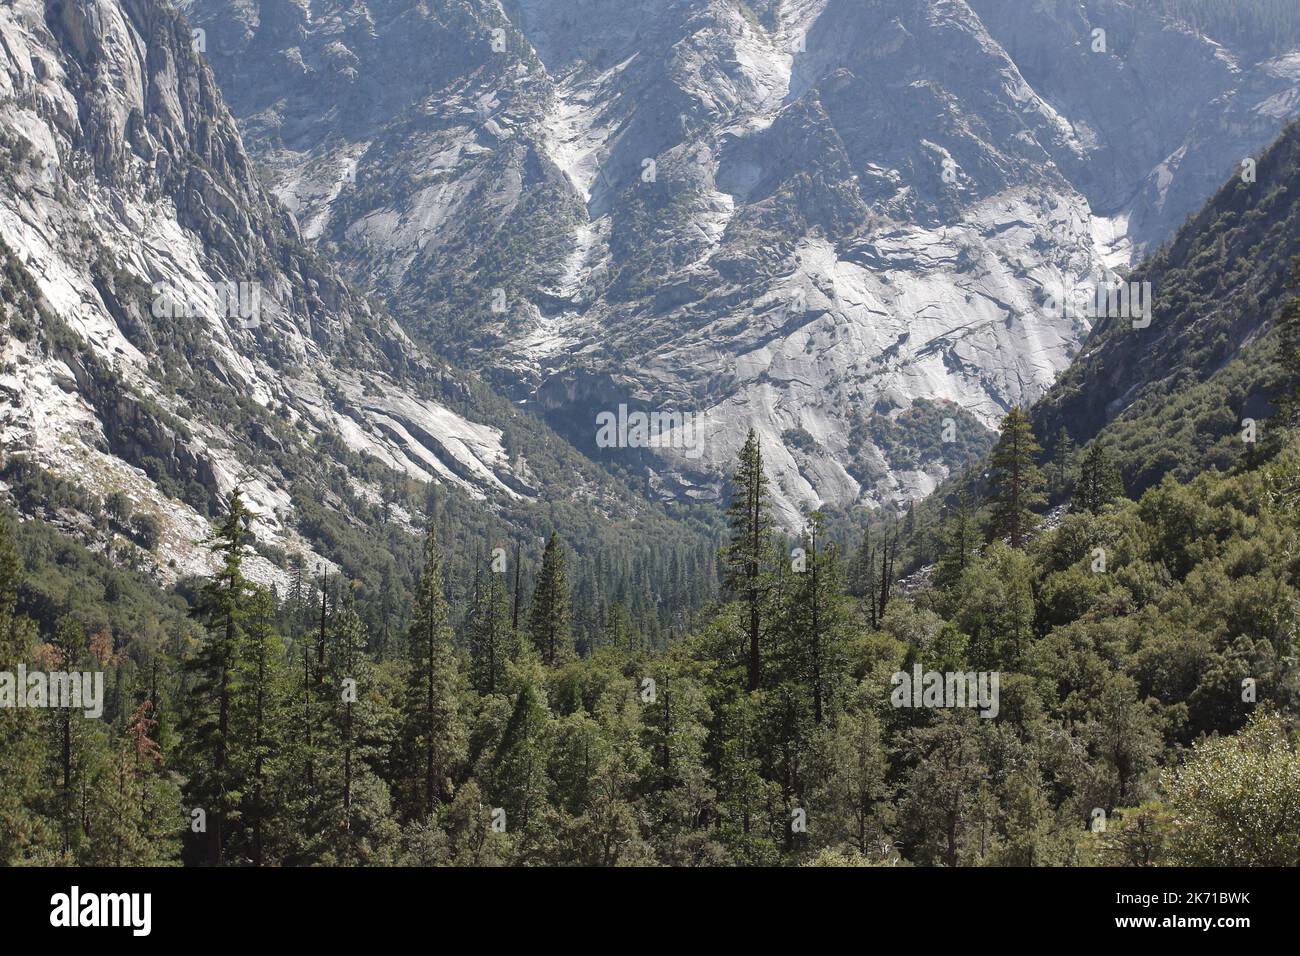 View of Kings Canyon, looking from Mist Falls trail. Stock Photo